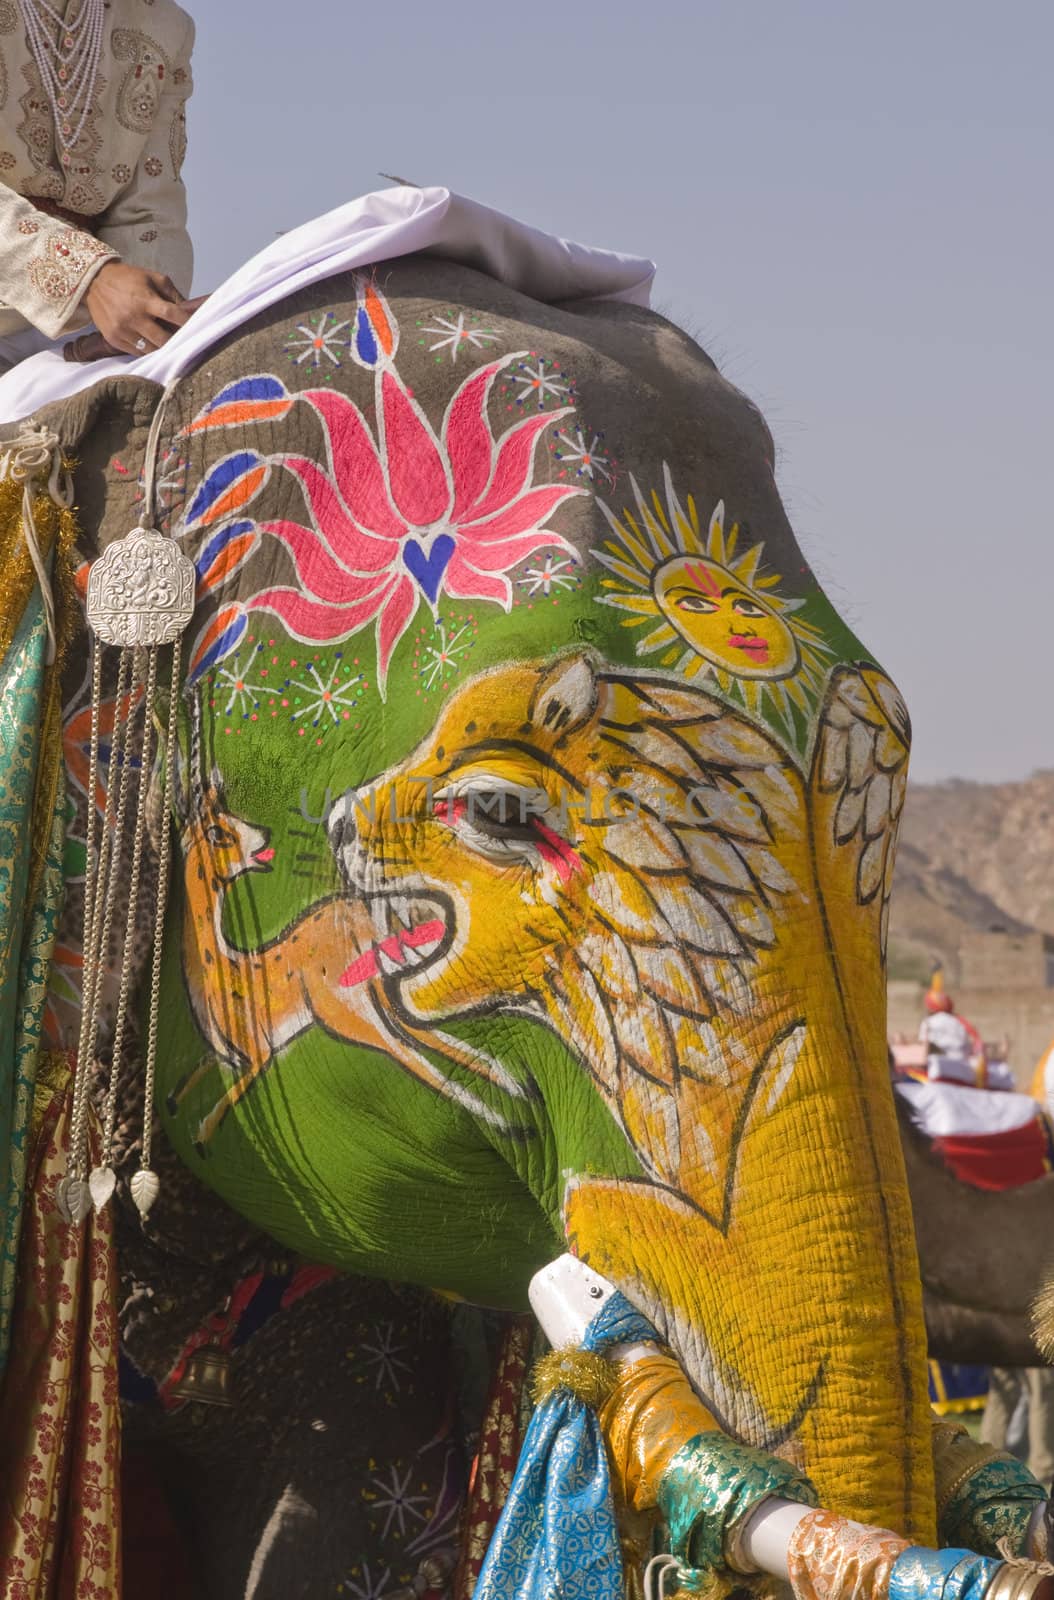 Decorated elephant at the annual elephant festival in Jaipur, Rajasthan, India